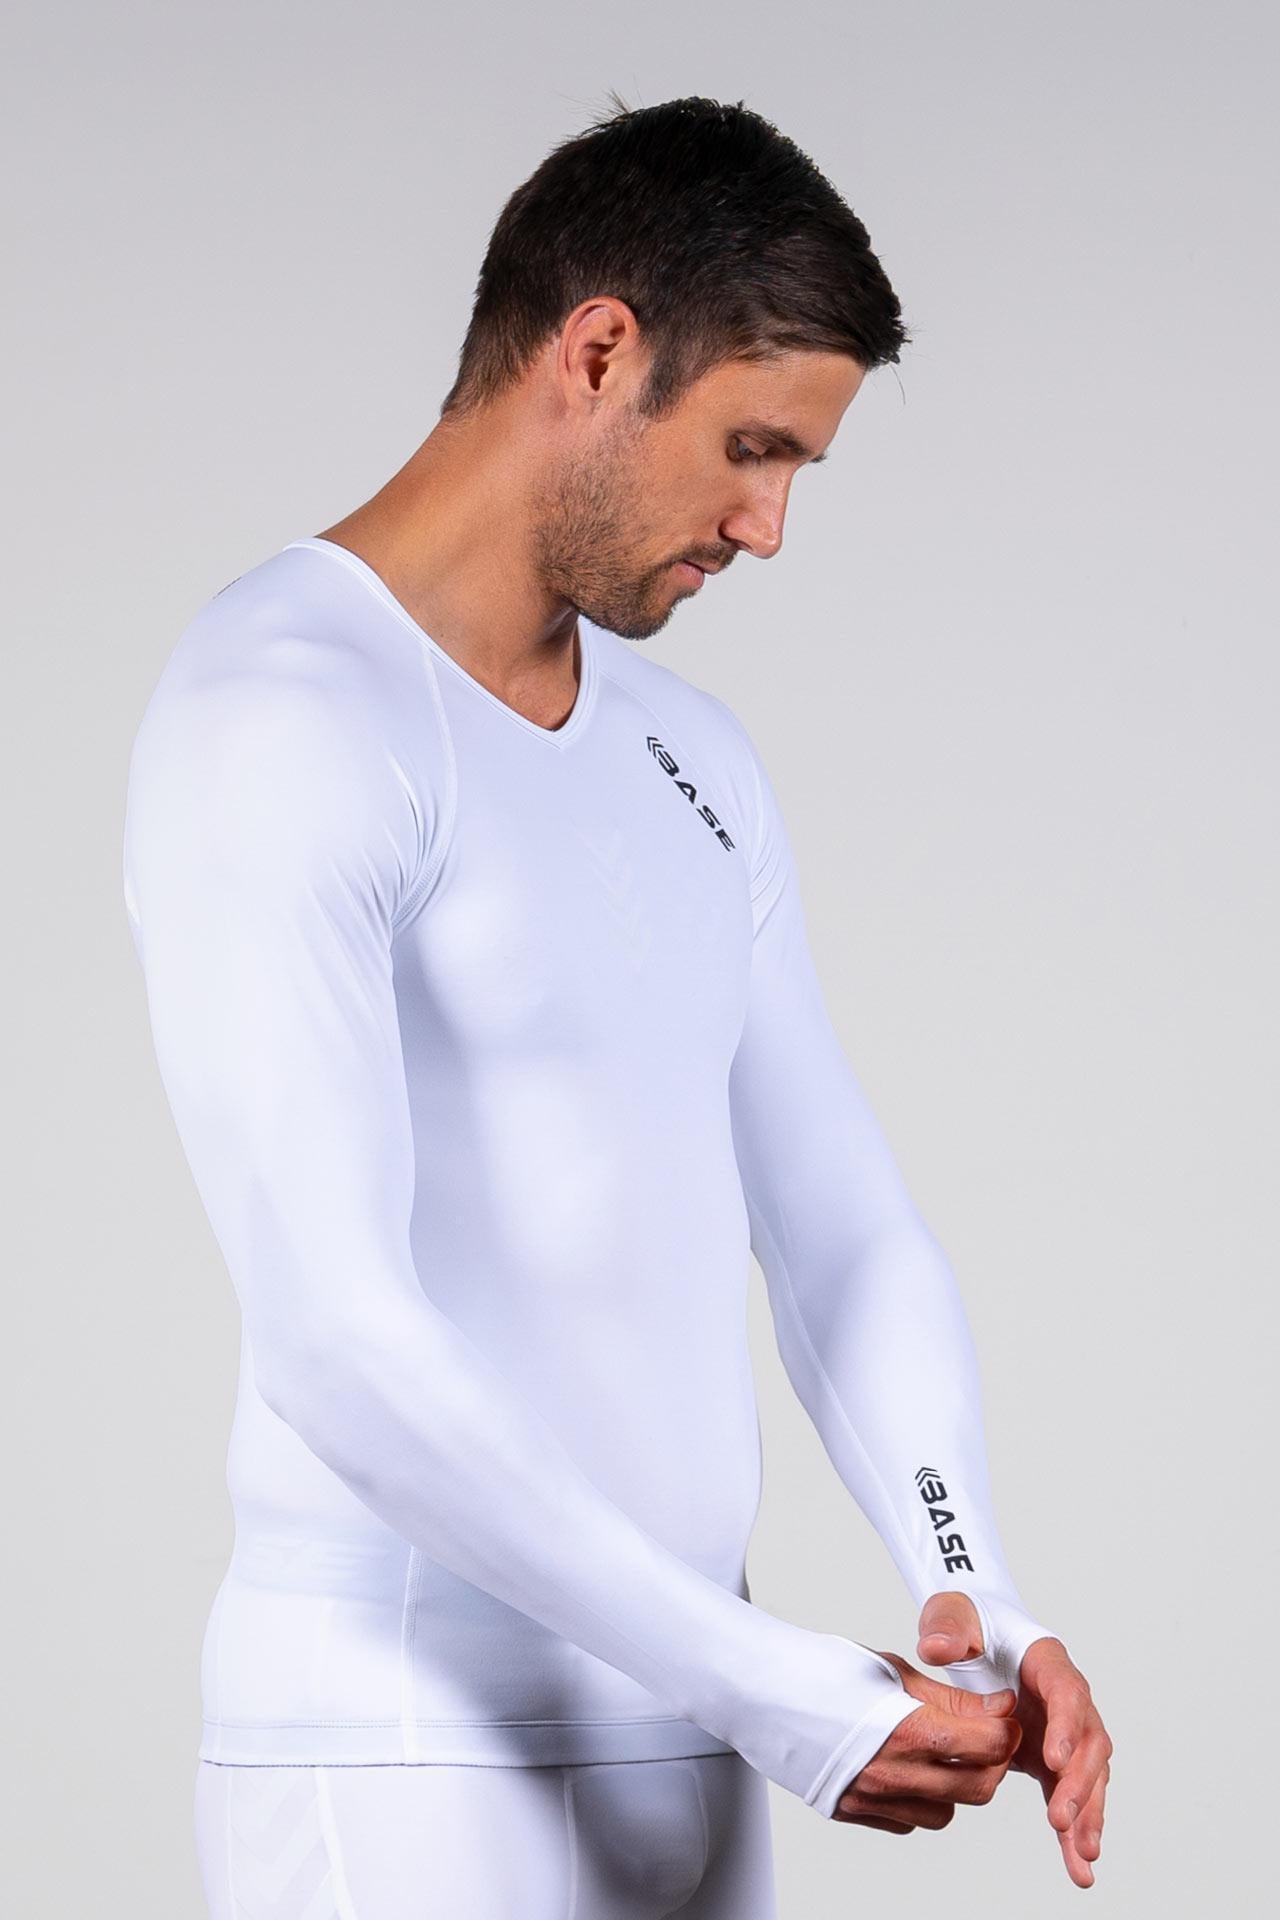 BASE Men's Long Sleeve Compression Tee - White - Adelaide 36ers